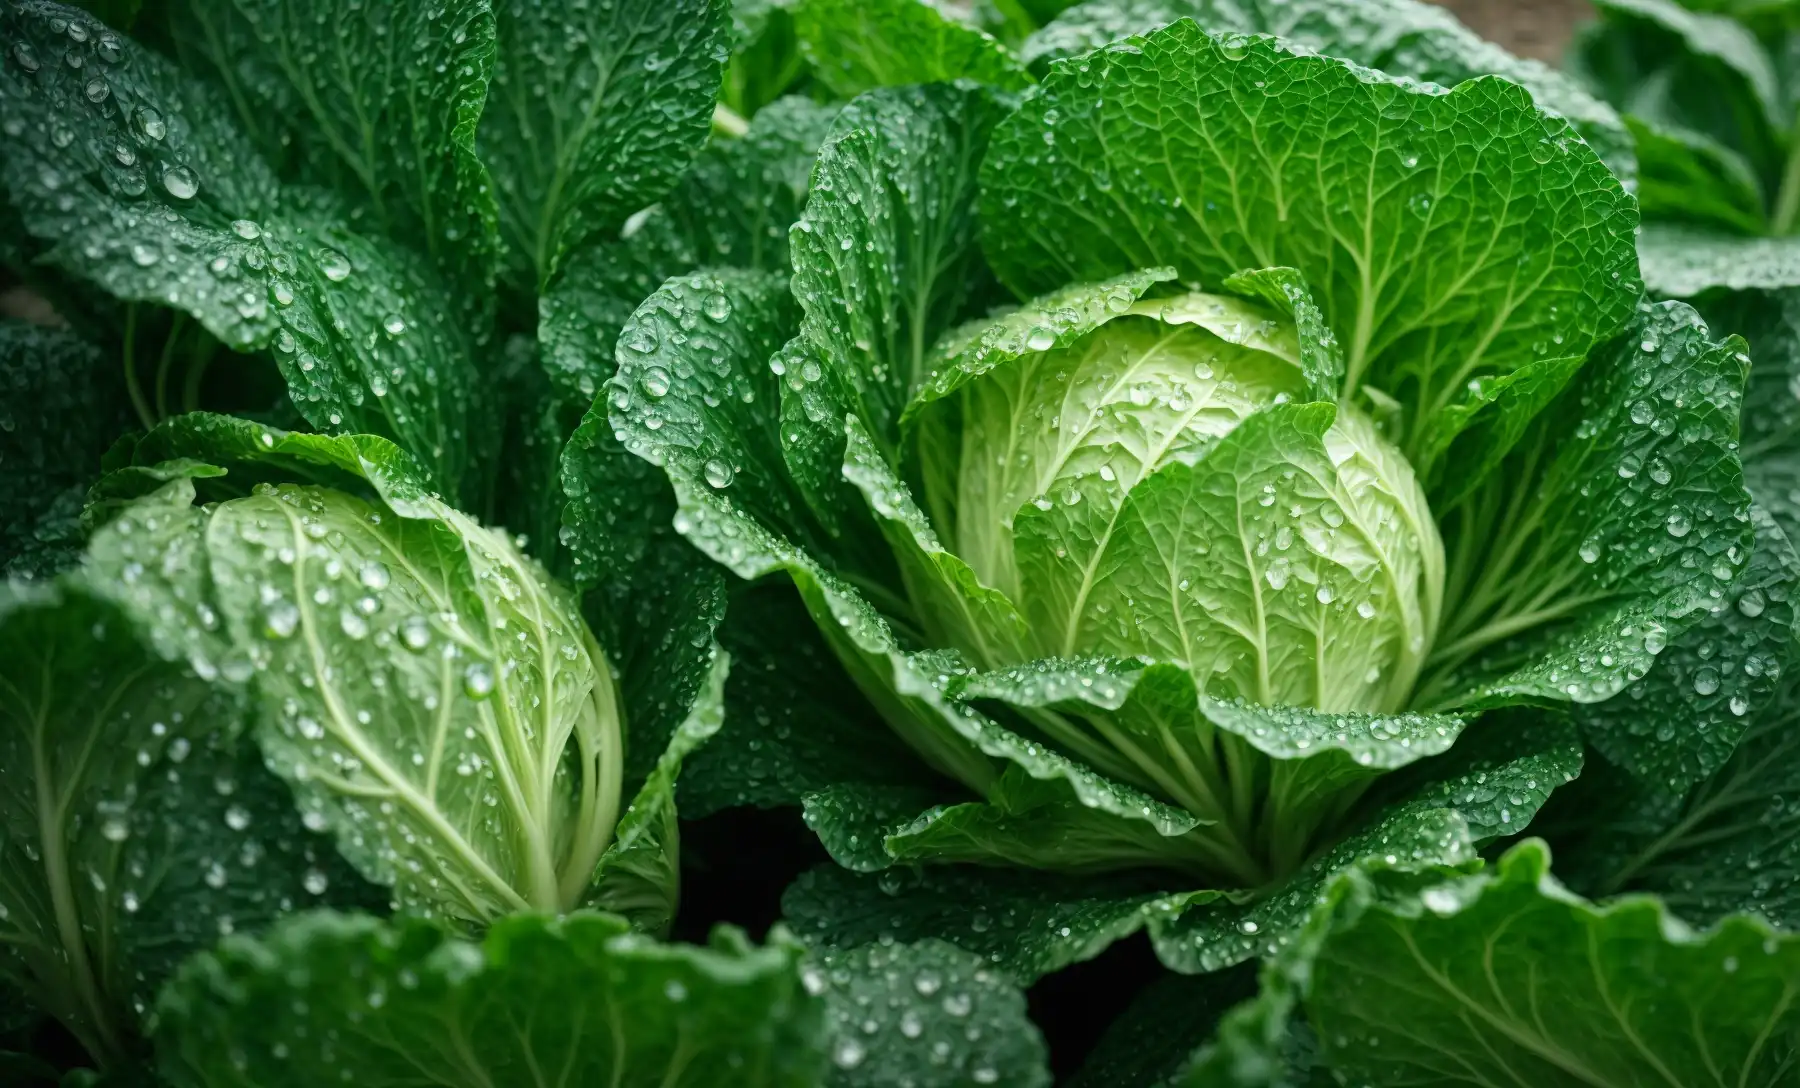 How Do I Know If Cabbage is Bad: Edible or Not